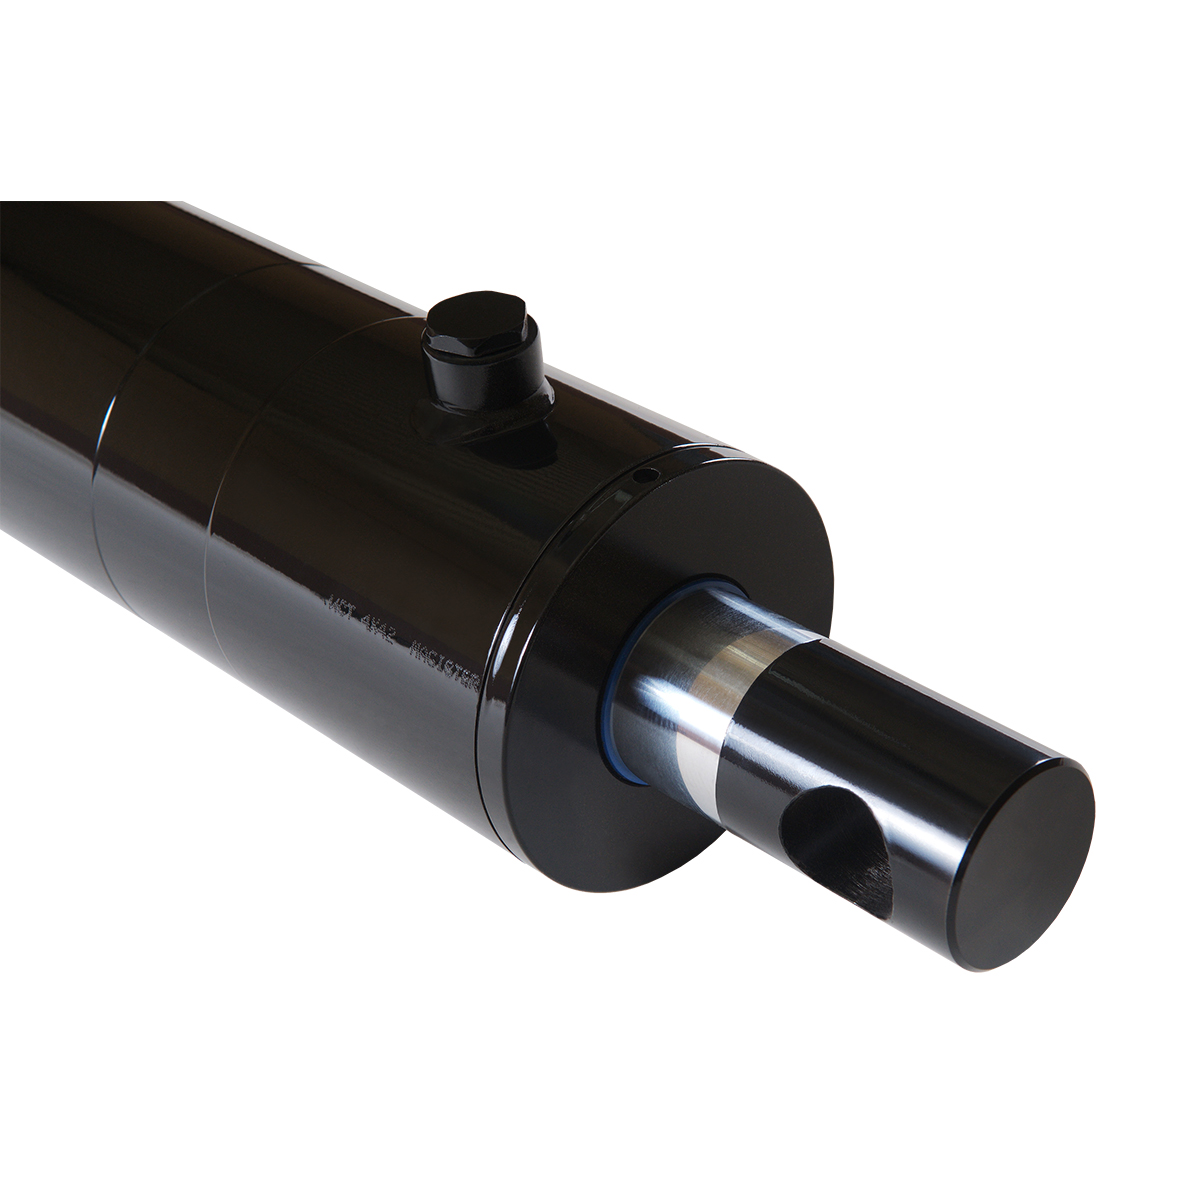 3.5 bore x 10 stroke hydraulic cylinder, welded pin eye double acting cylinder | Magister Hydraulics